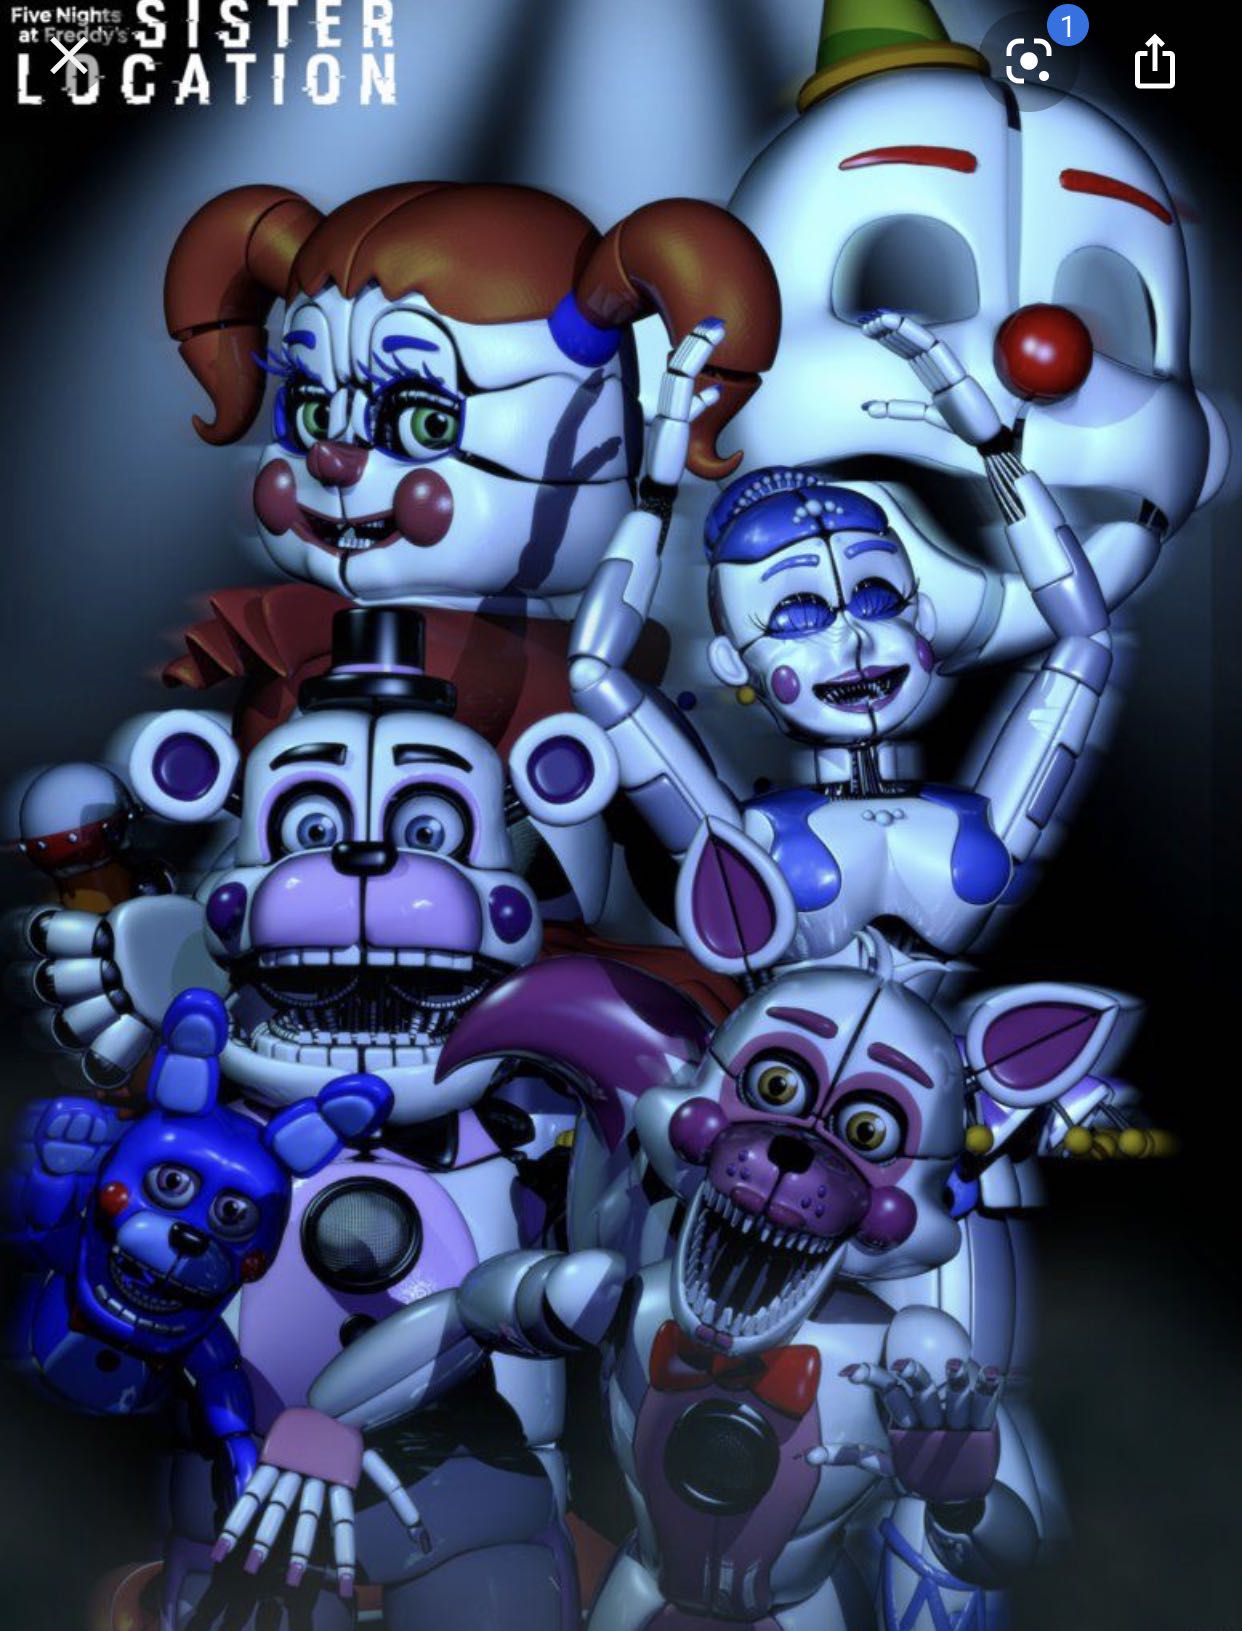 FNAF 5 sister location. Story. Contains 1-4 also - The new ...